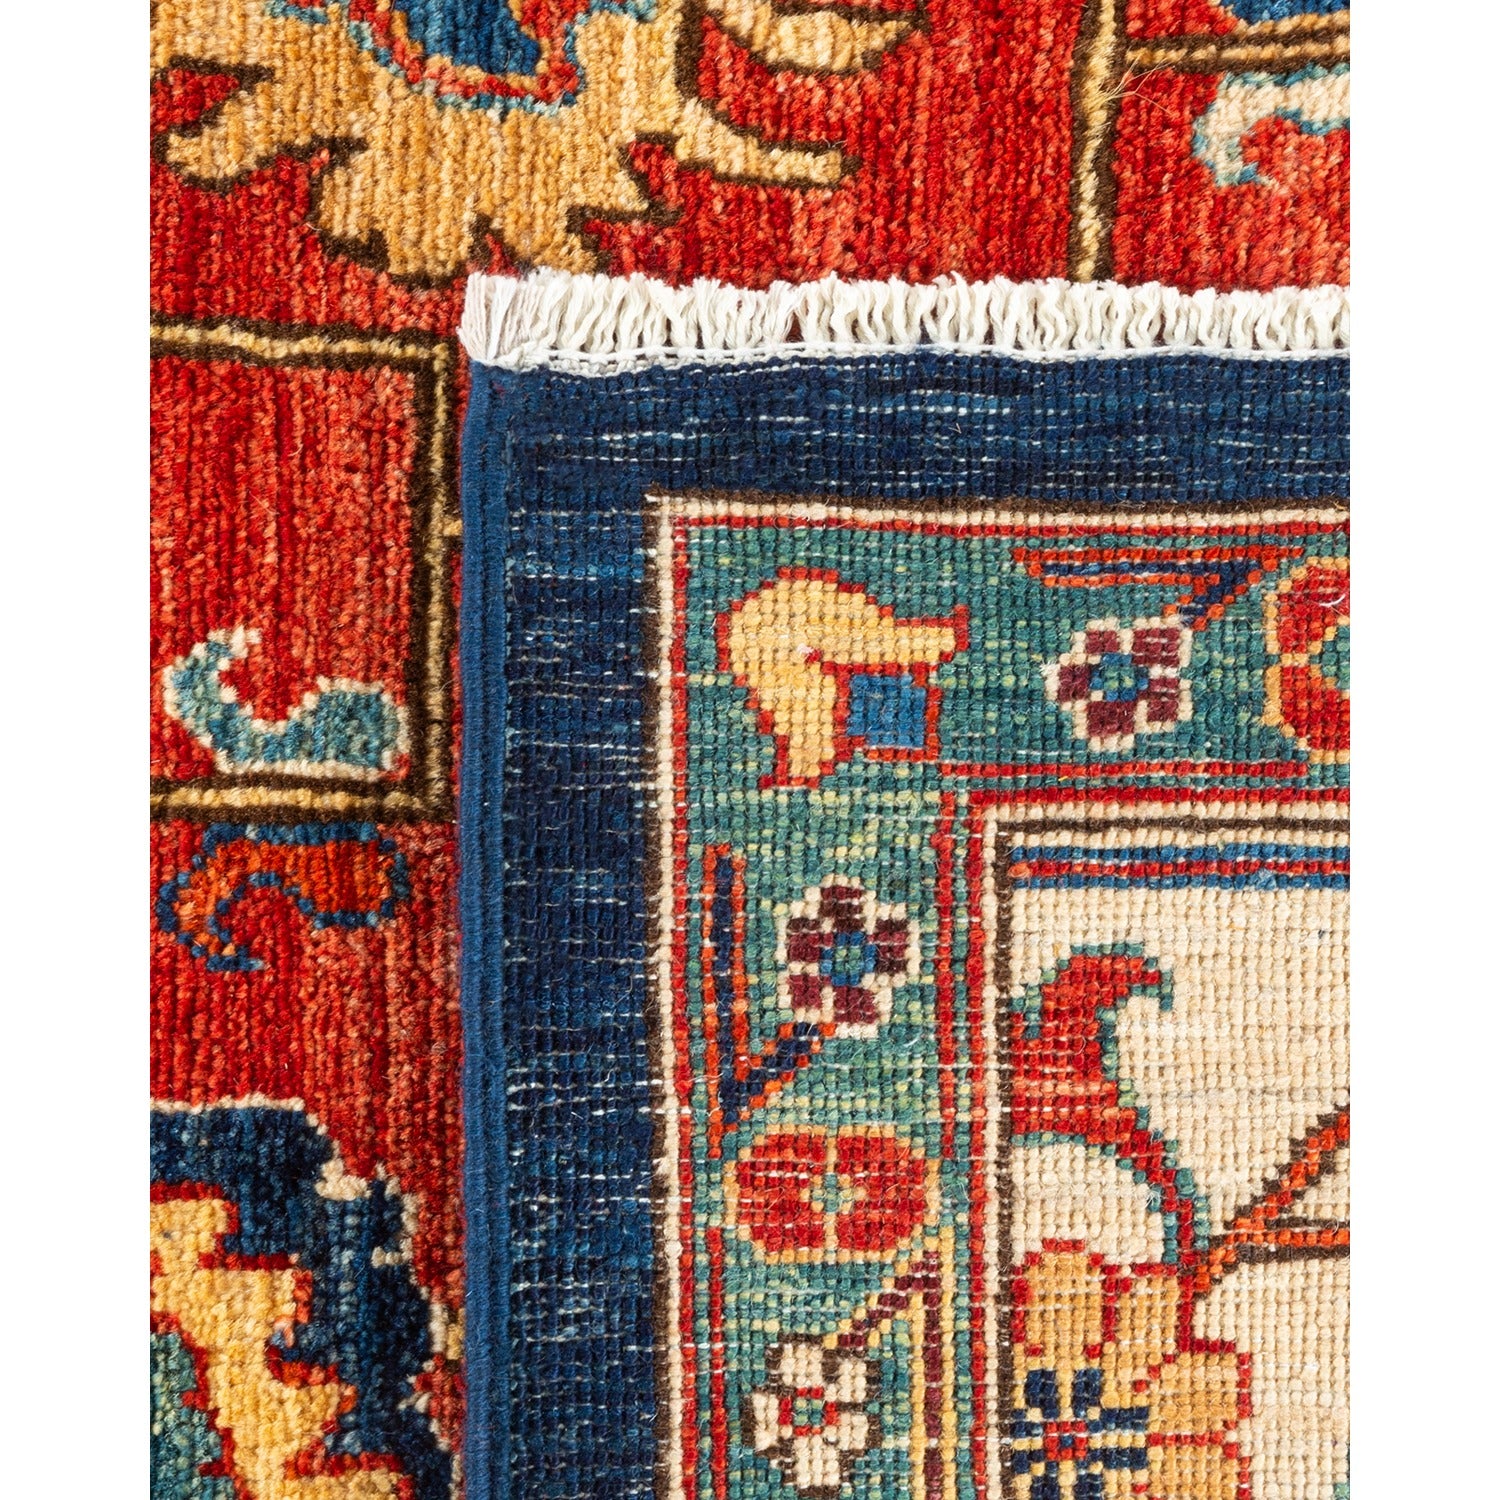 Intricate hand-woven rug showcases vibrant colors and traditional motifs.